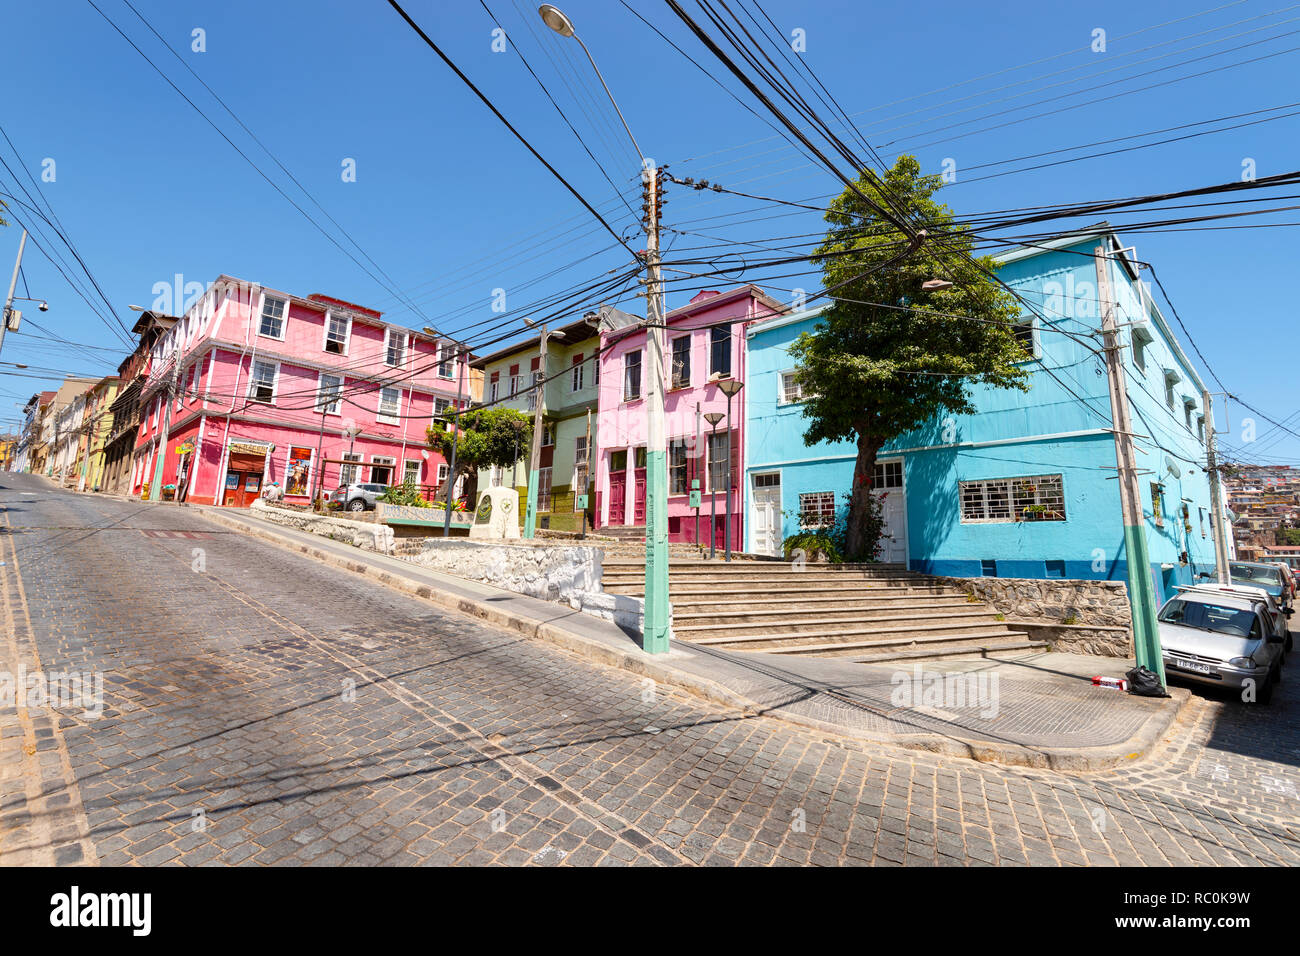 Some colourful buildings beside a street on the steep hills around Valparaiso, Chile. Stock Photo